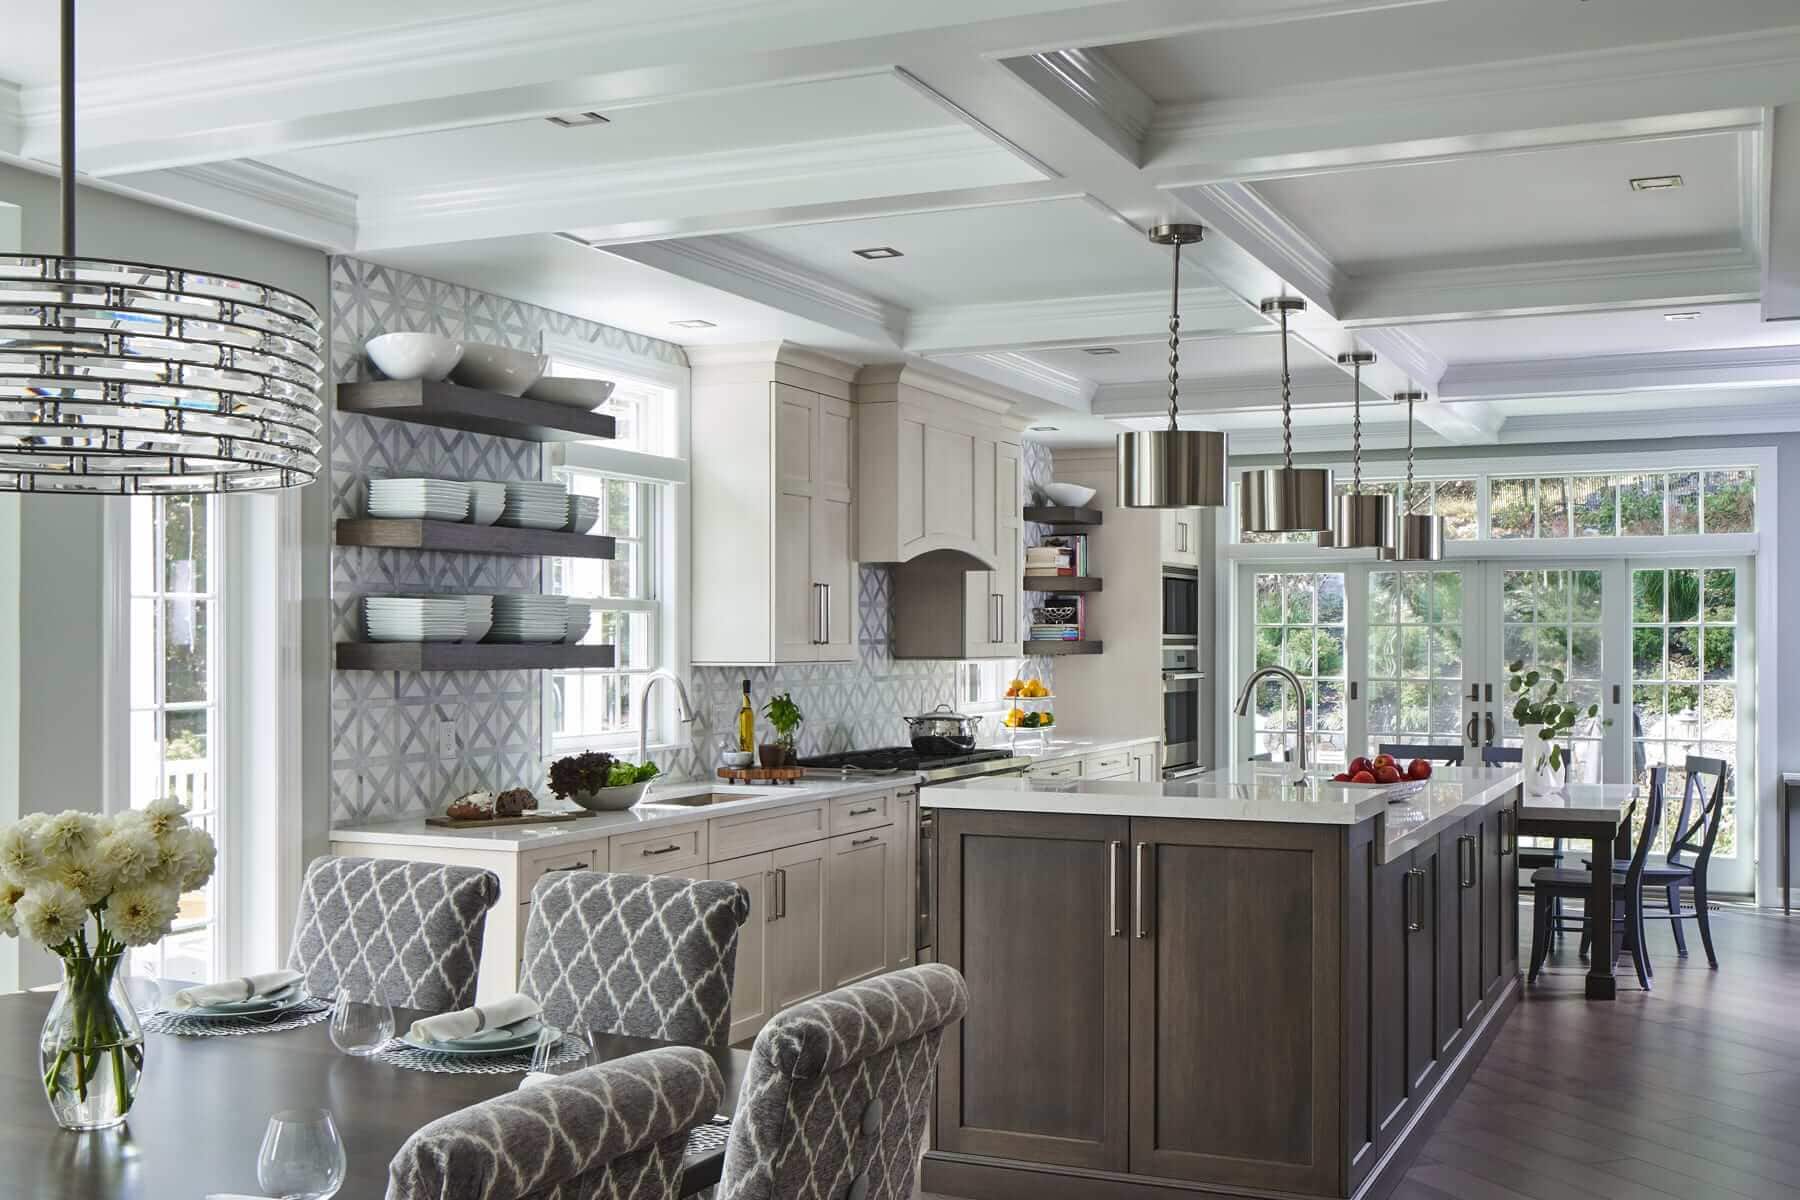 Elegant kitchen with large eat-at island in Benjamin Moore's Vale Mist.